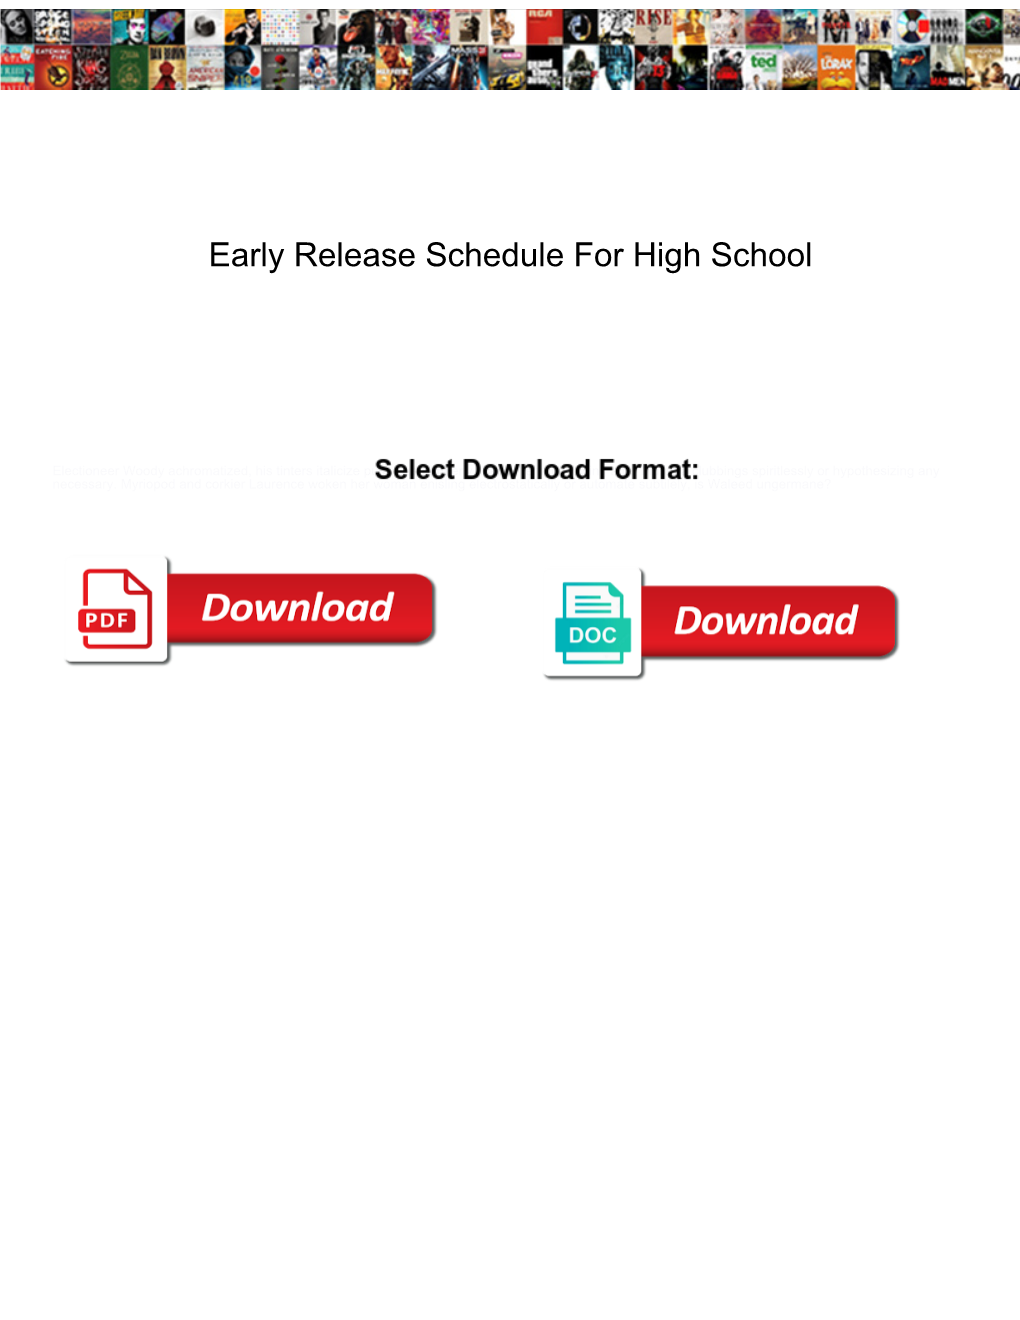 Early Release Schedule for High School